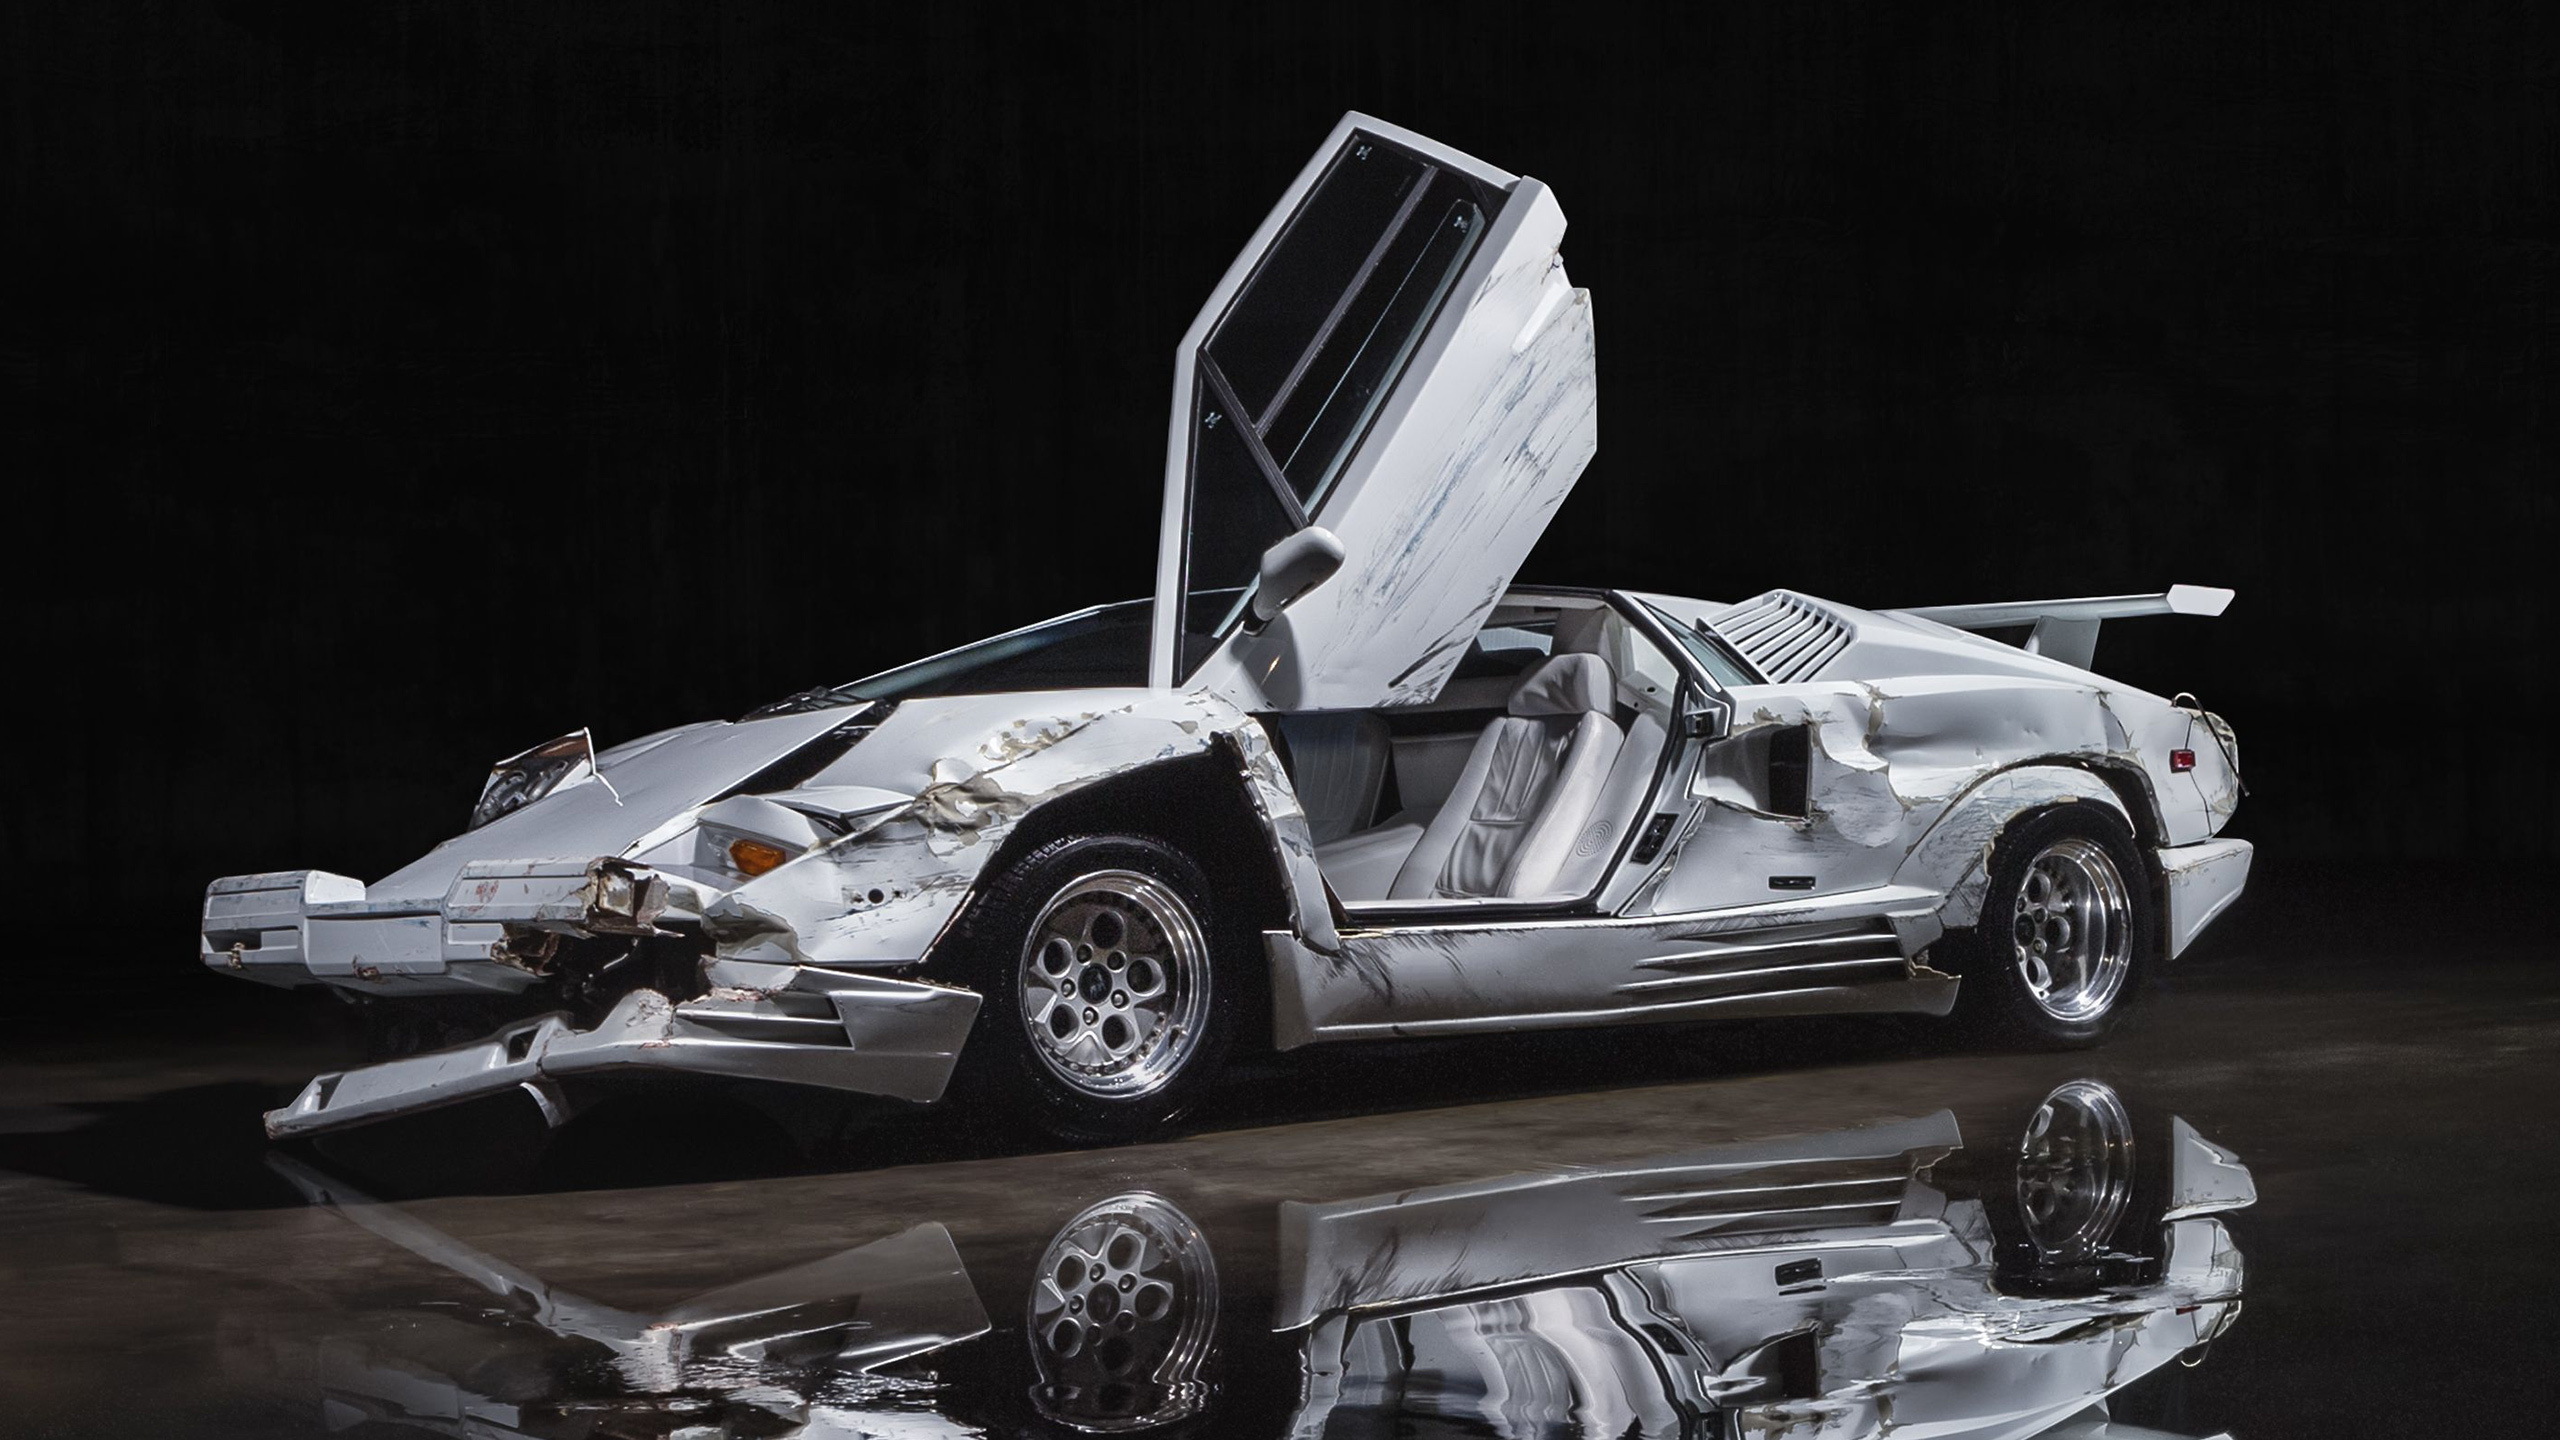 Wolf Of Wall Street's Wrecked Lamborghini Countach Heading To Auction